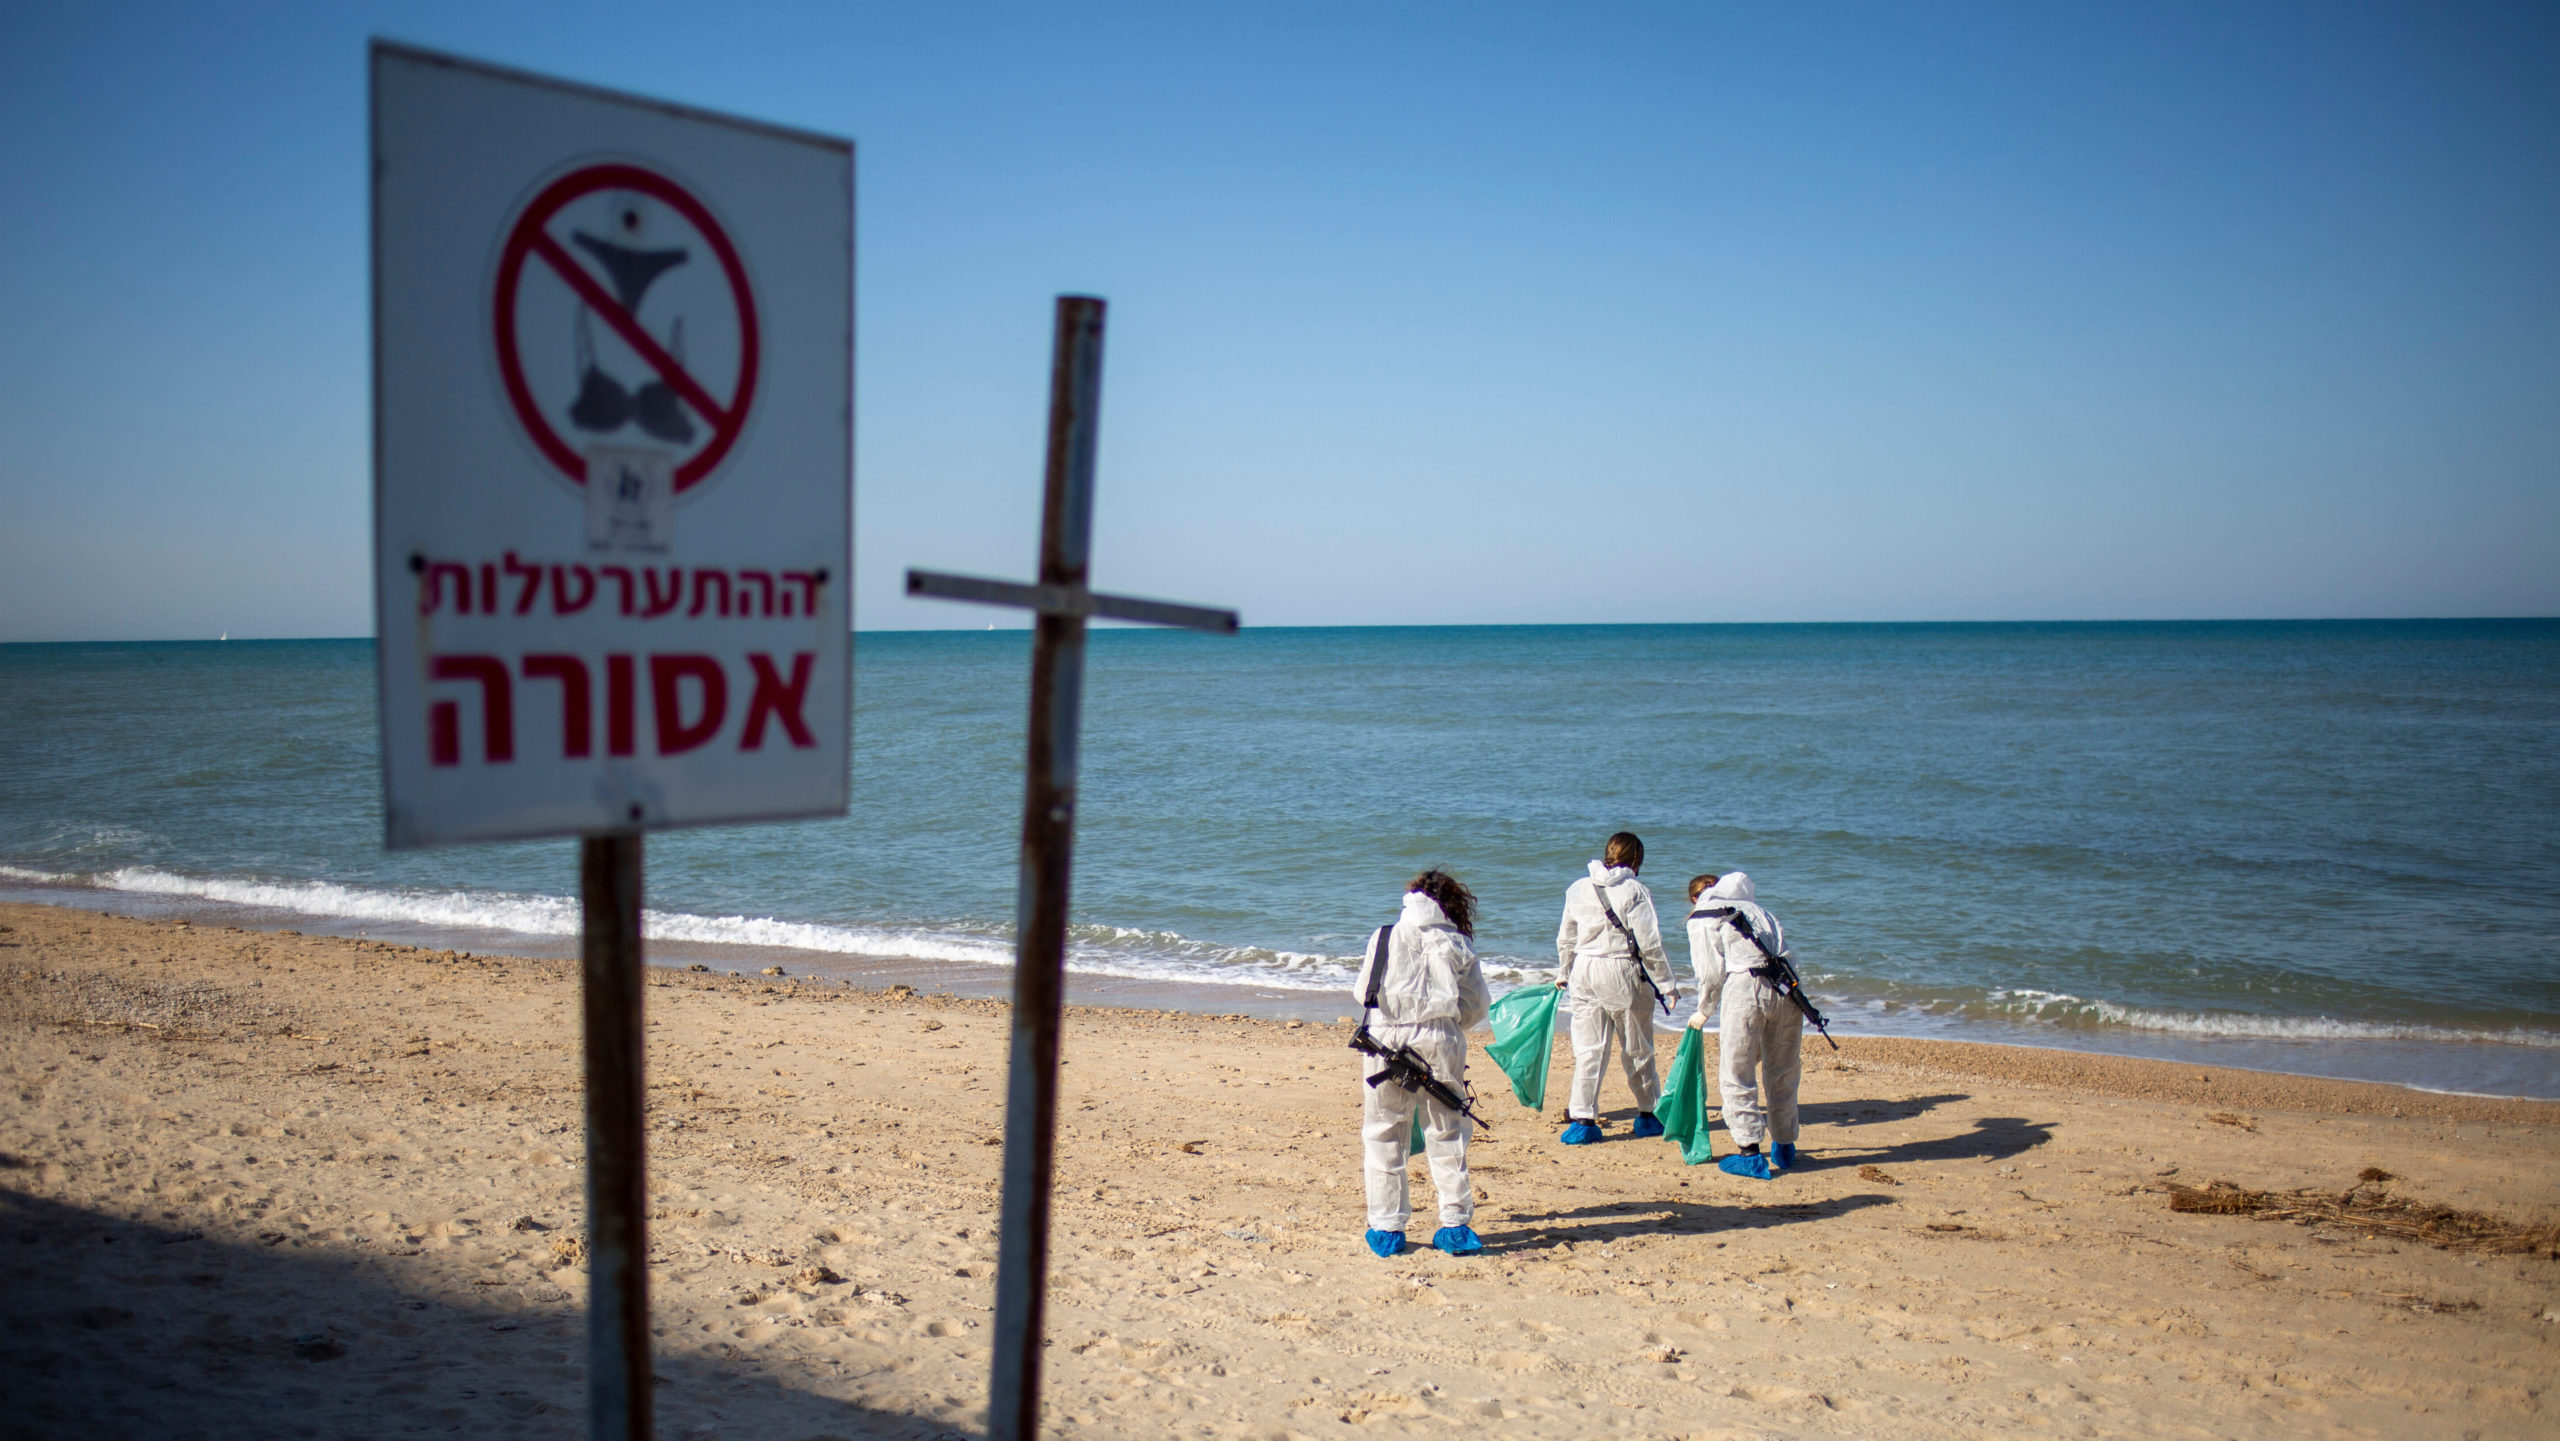 Israeli soldiers wearing protective suits clean tar from an oil spill in the Mediterranean Sea. (Photo: Ariel Schalit, AP)